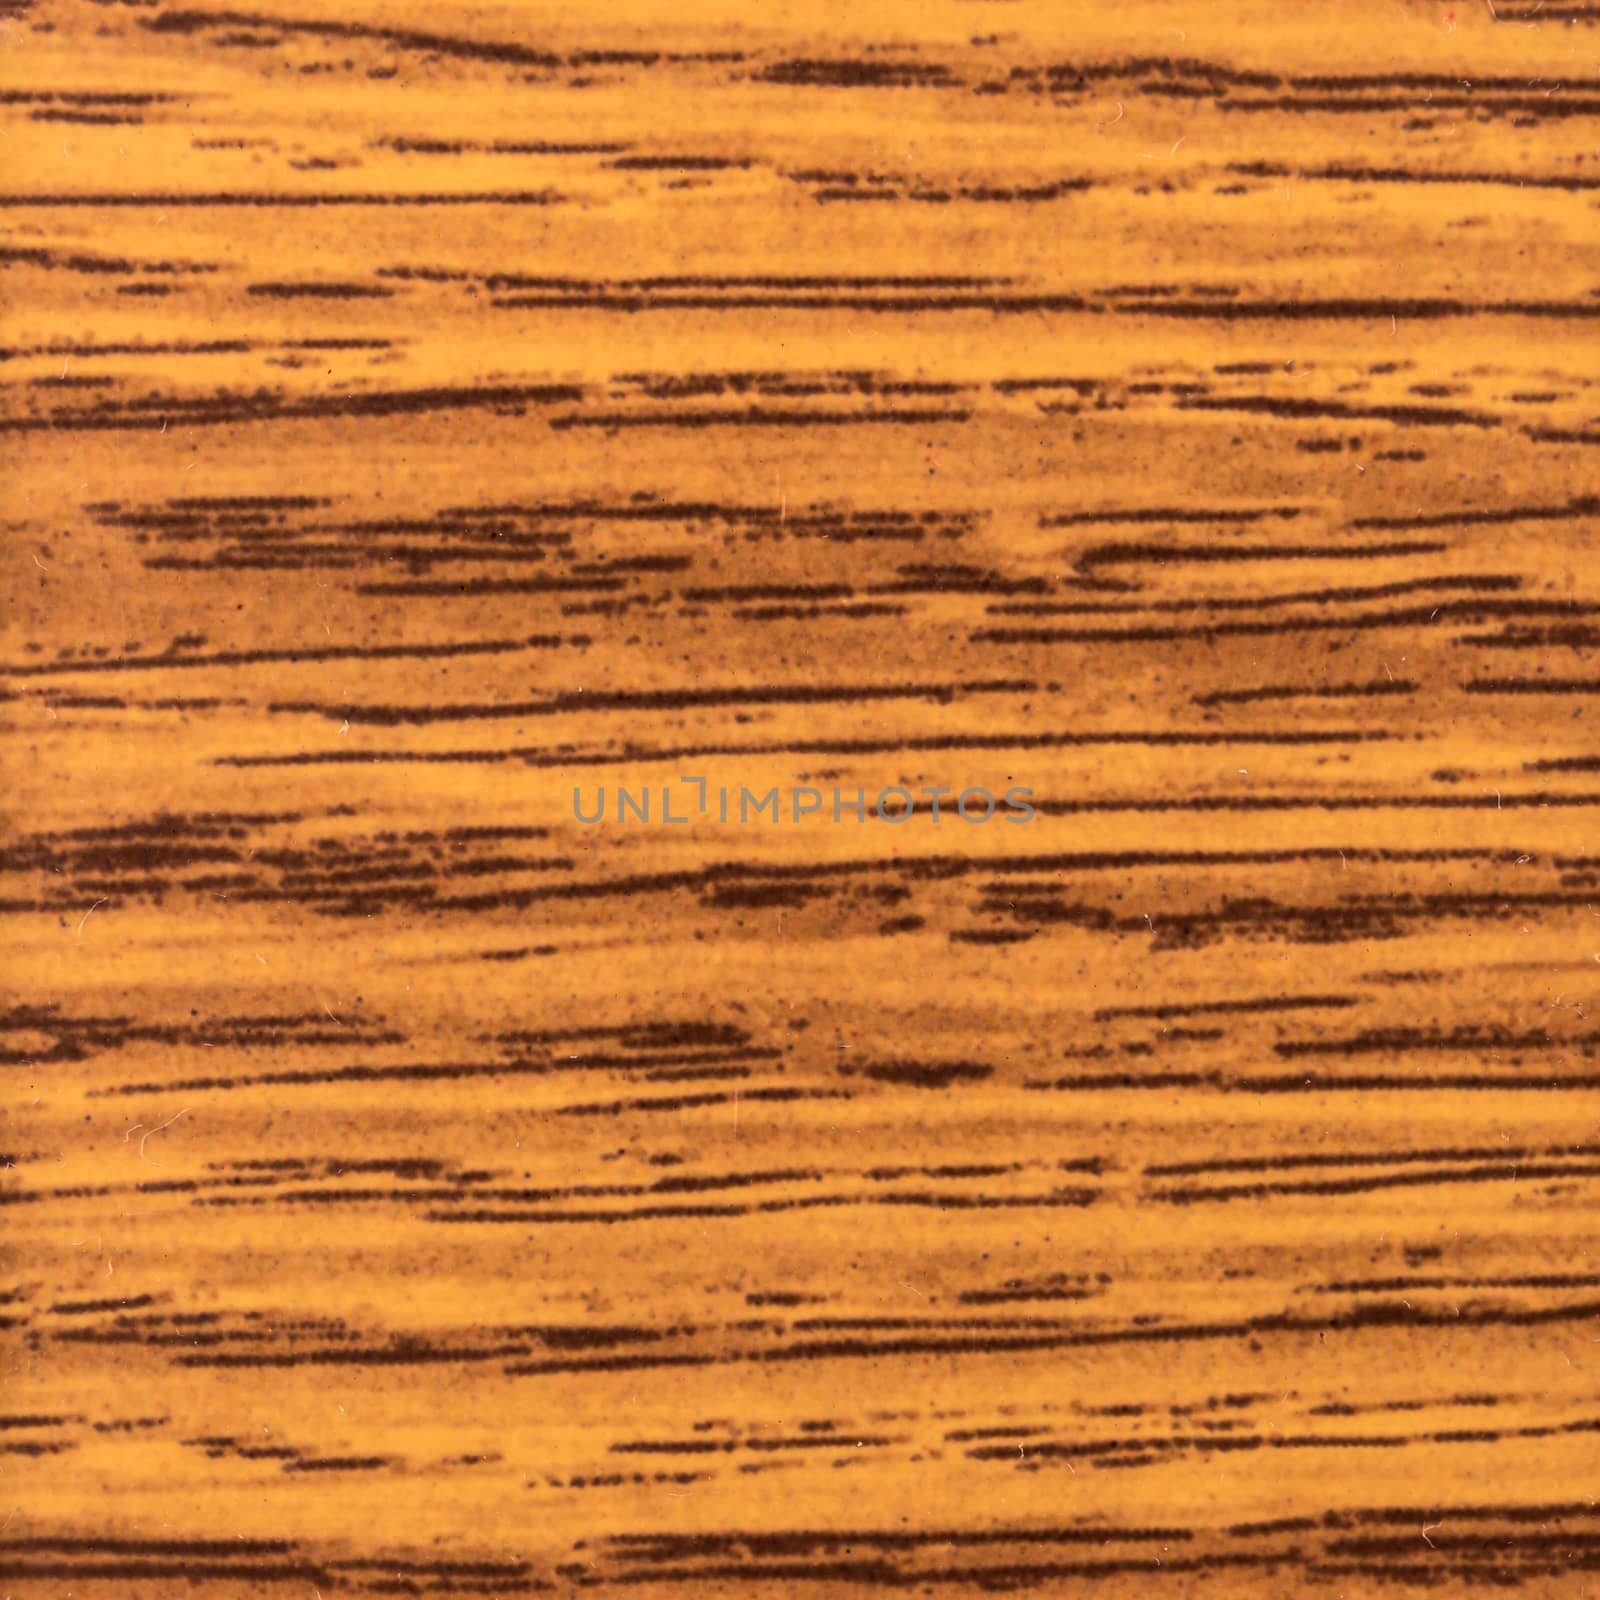 Abstract wood texture with focus on the wood's grain. Mahogany w by AnaMarques